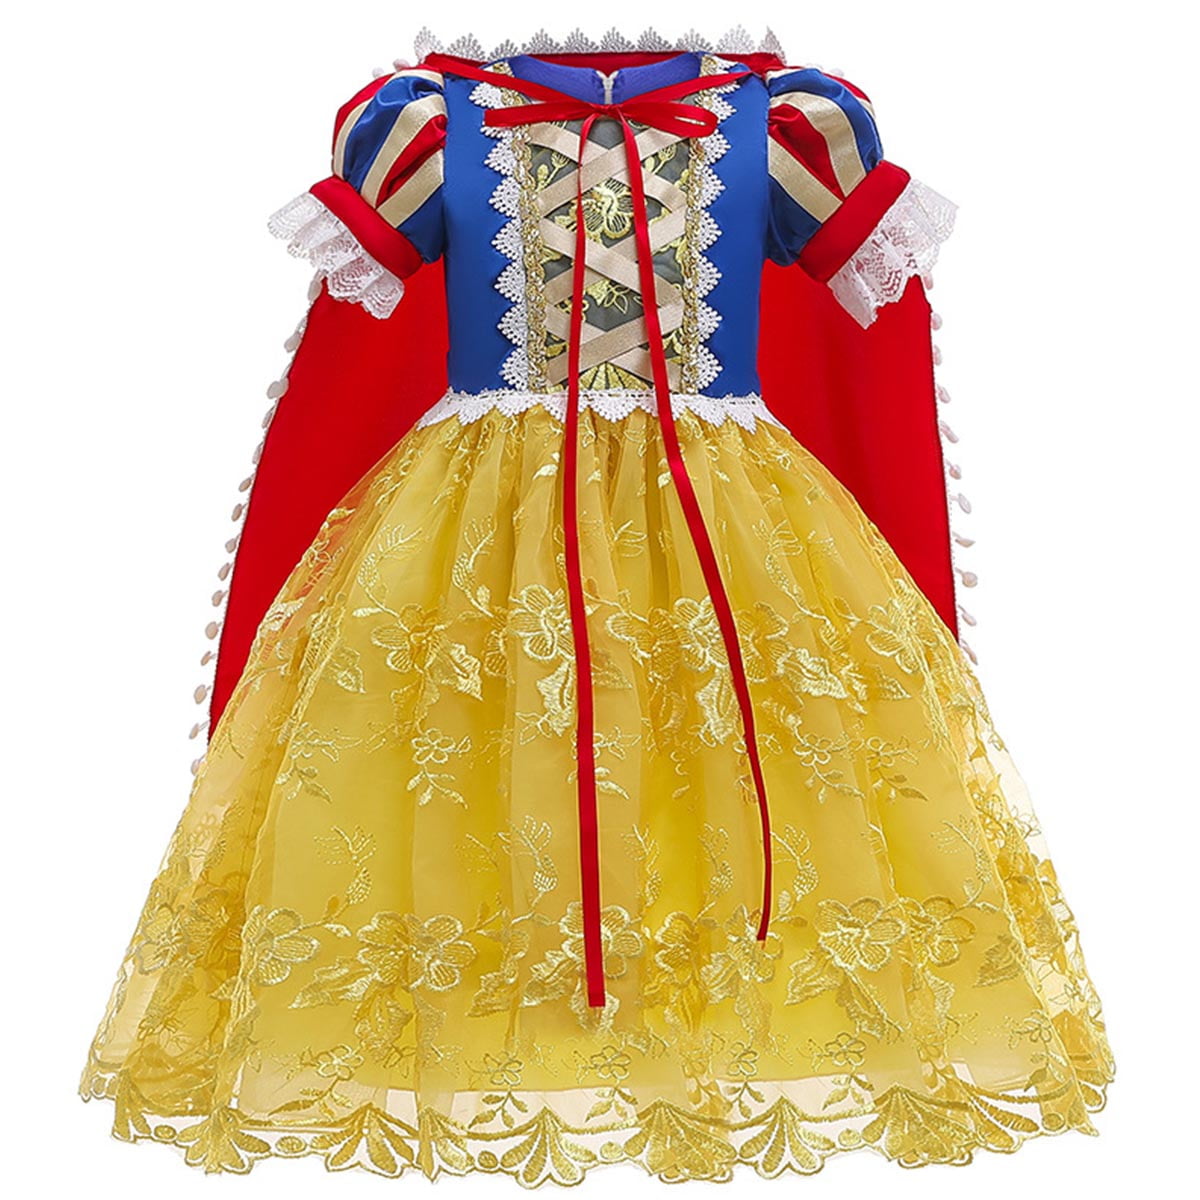 BNWT New Snow White PRINCESS girls costume dress up pretend play cosplay Gown 